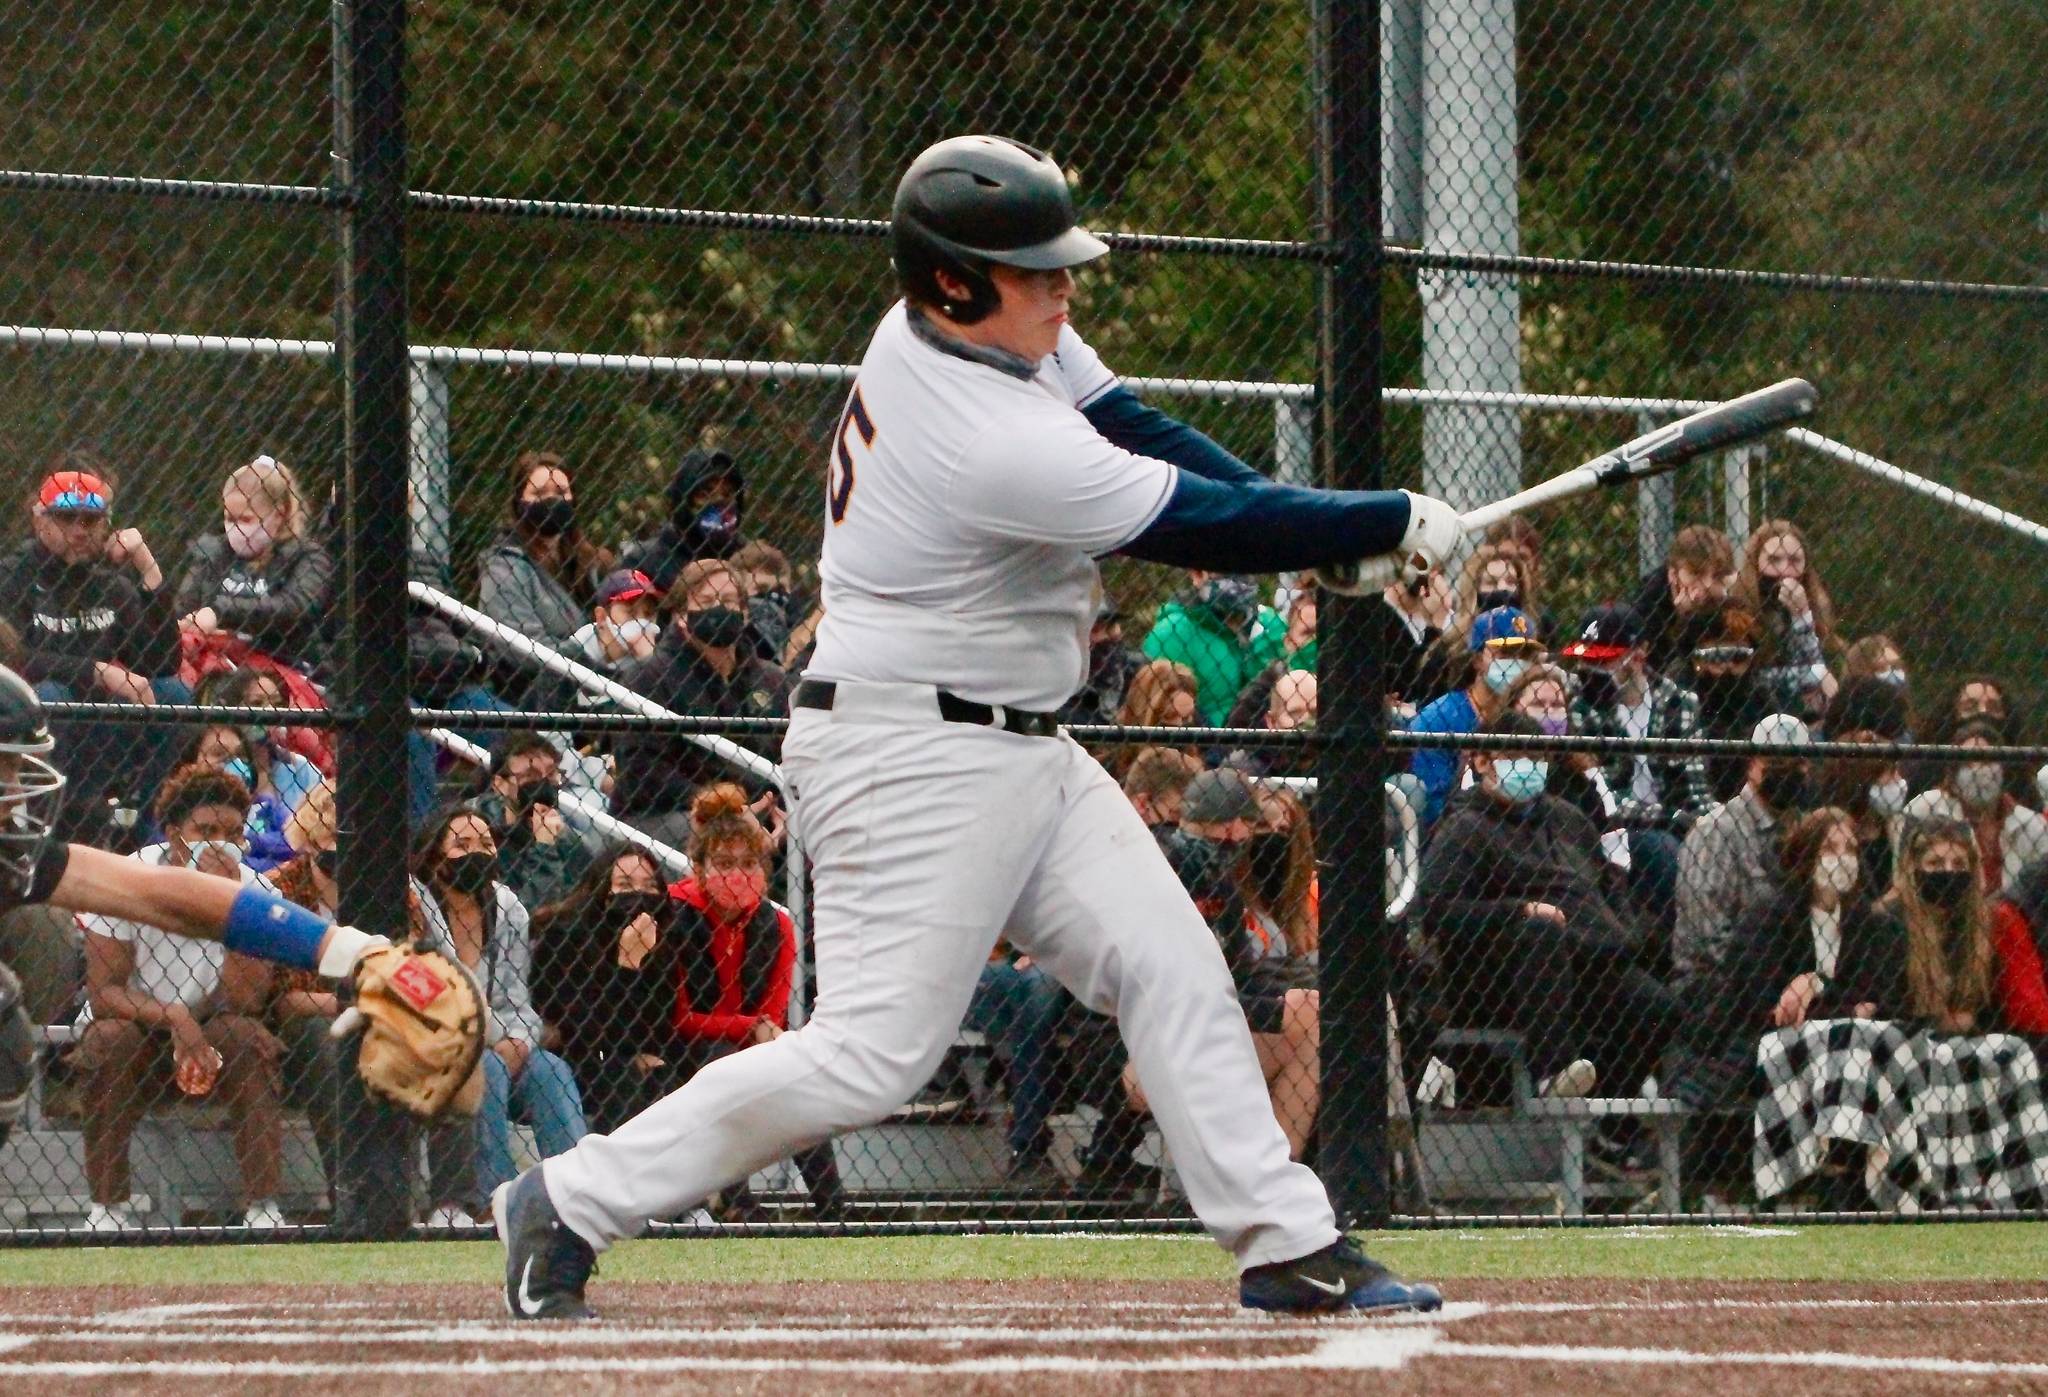 Connor Sweeny homered for Bainbridge in the first game of the Olympic League tournament against North Kitsap. (Mark Krulish/Kitsap News Group)